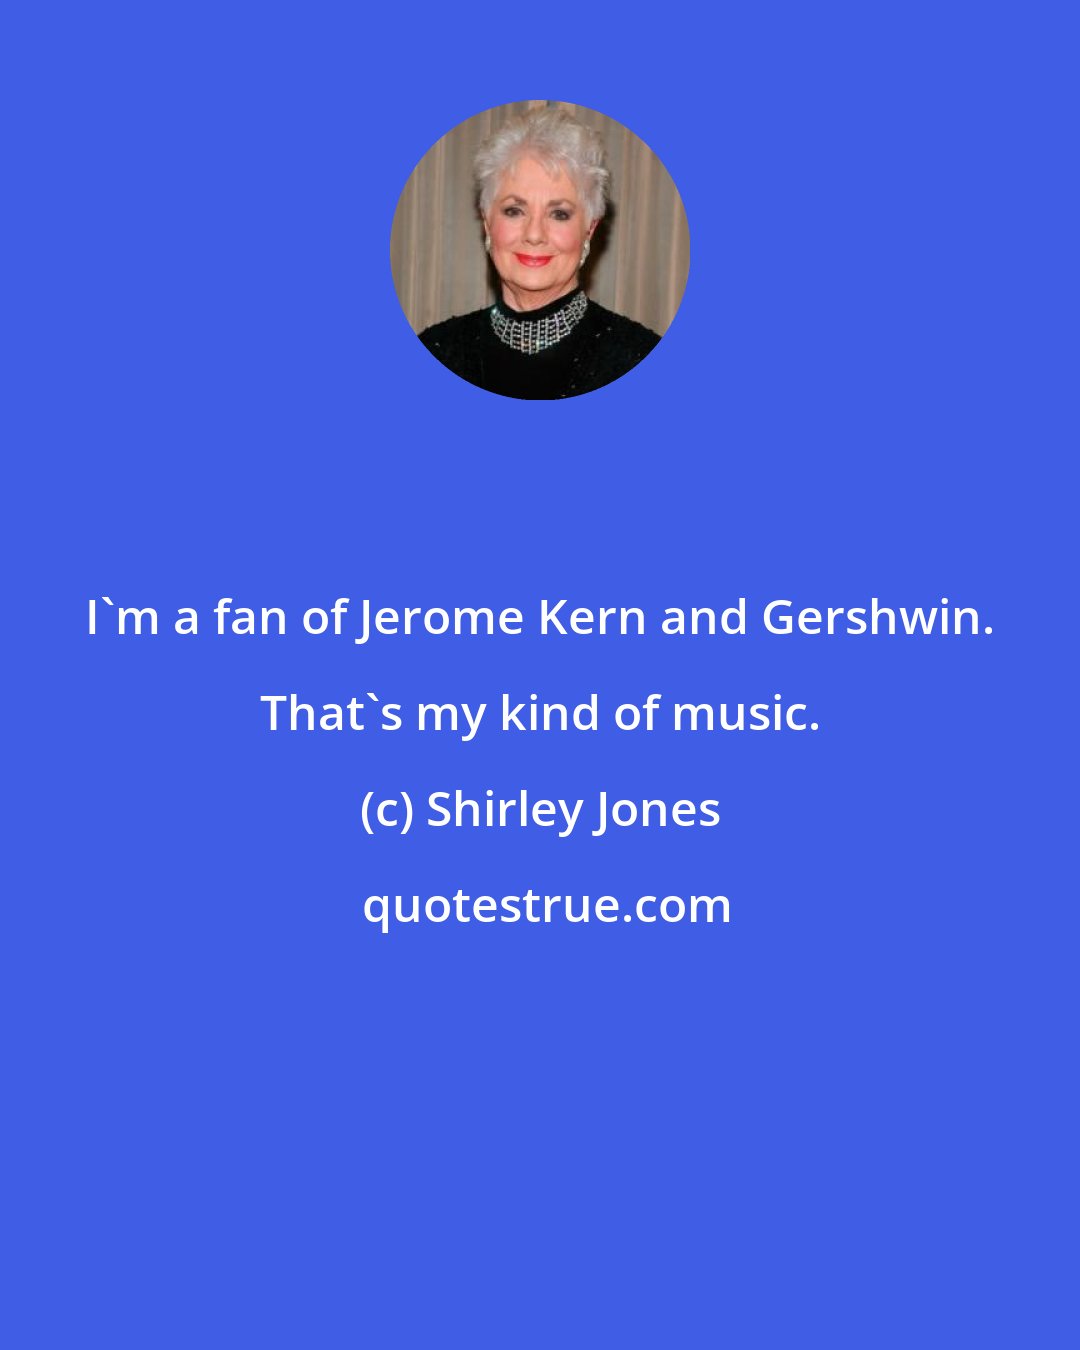 Shirley Jones: I'm a fan of Jerome Kern and Gershwin. That's my kind of music.